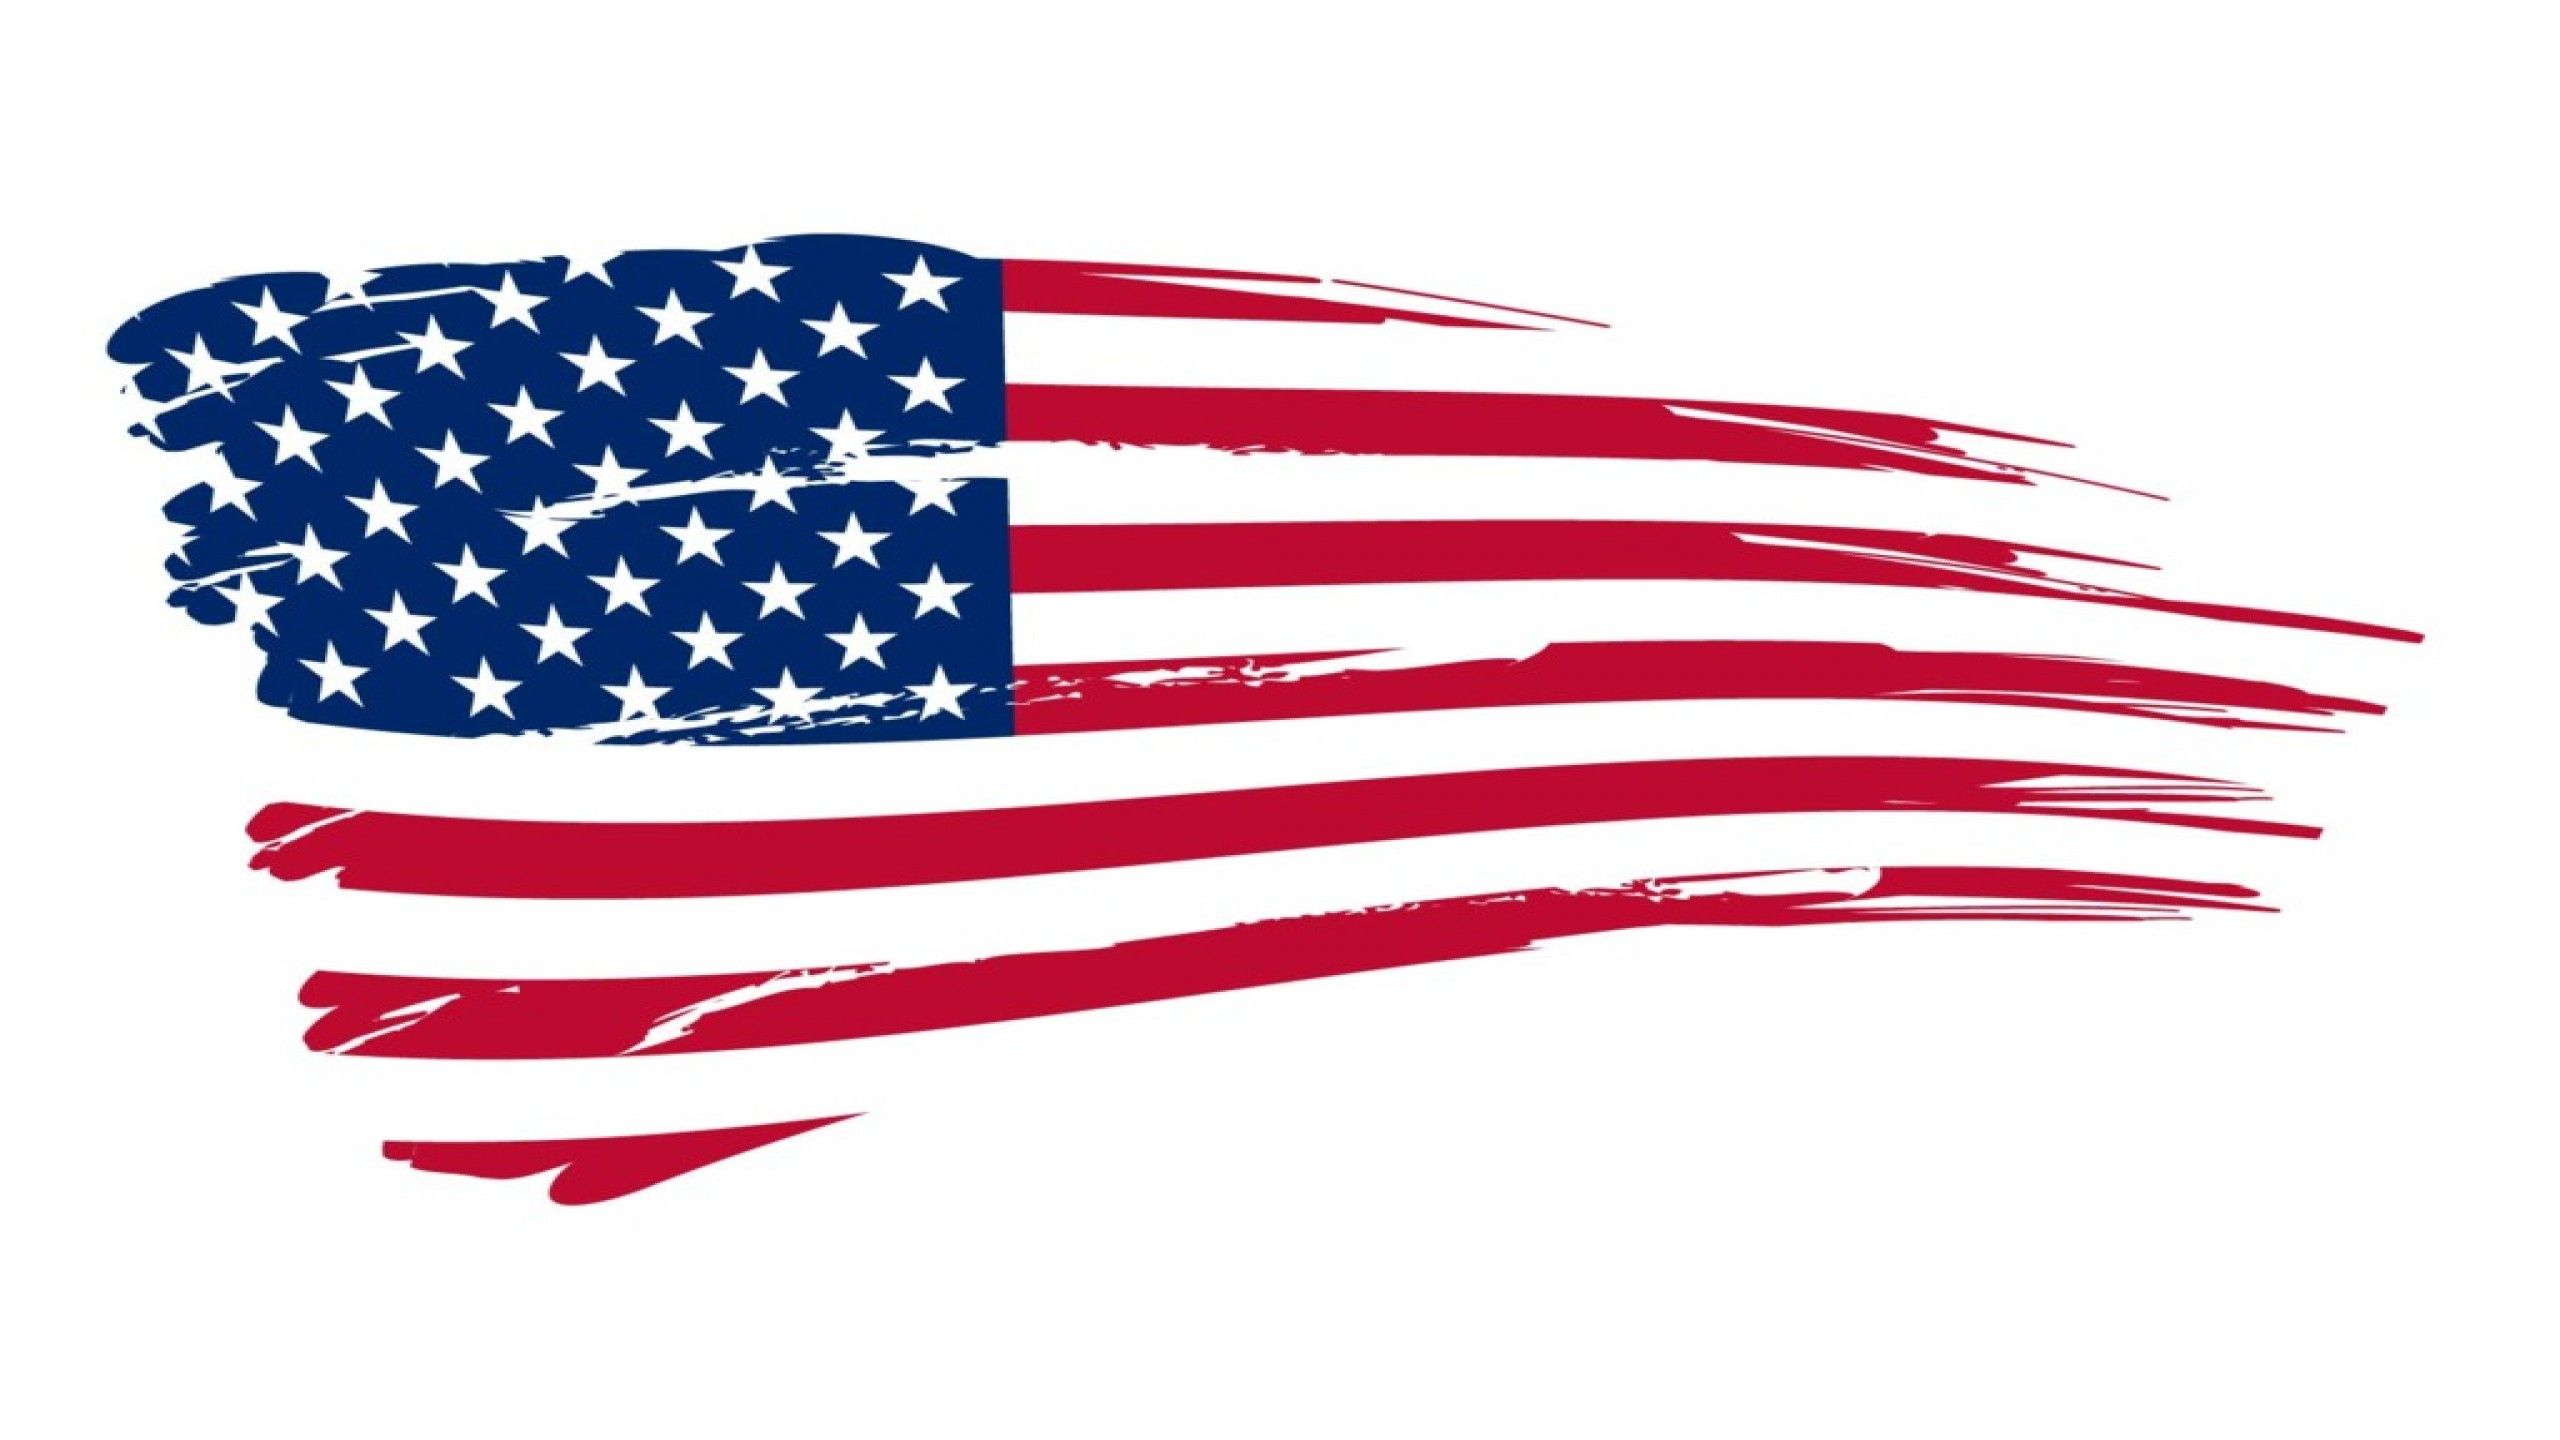 Free american flags clipart